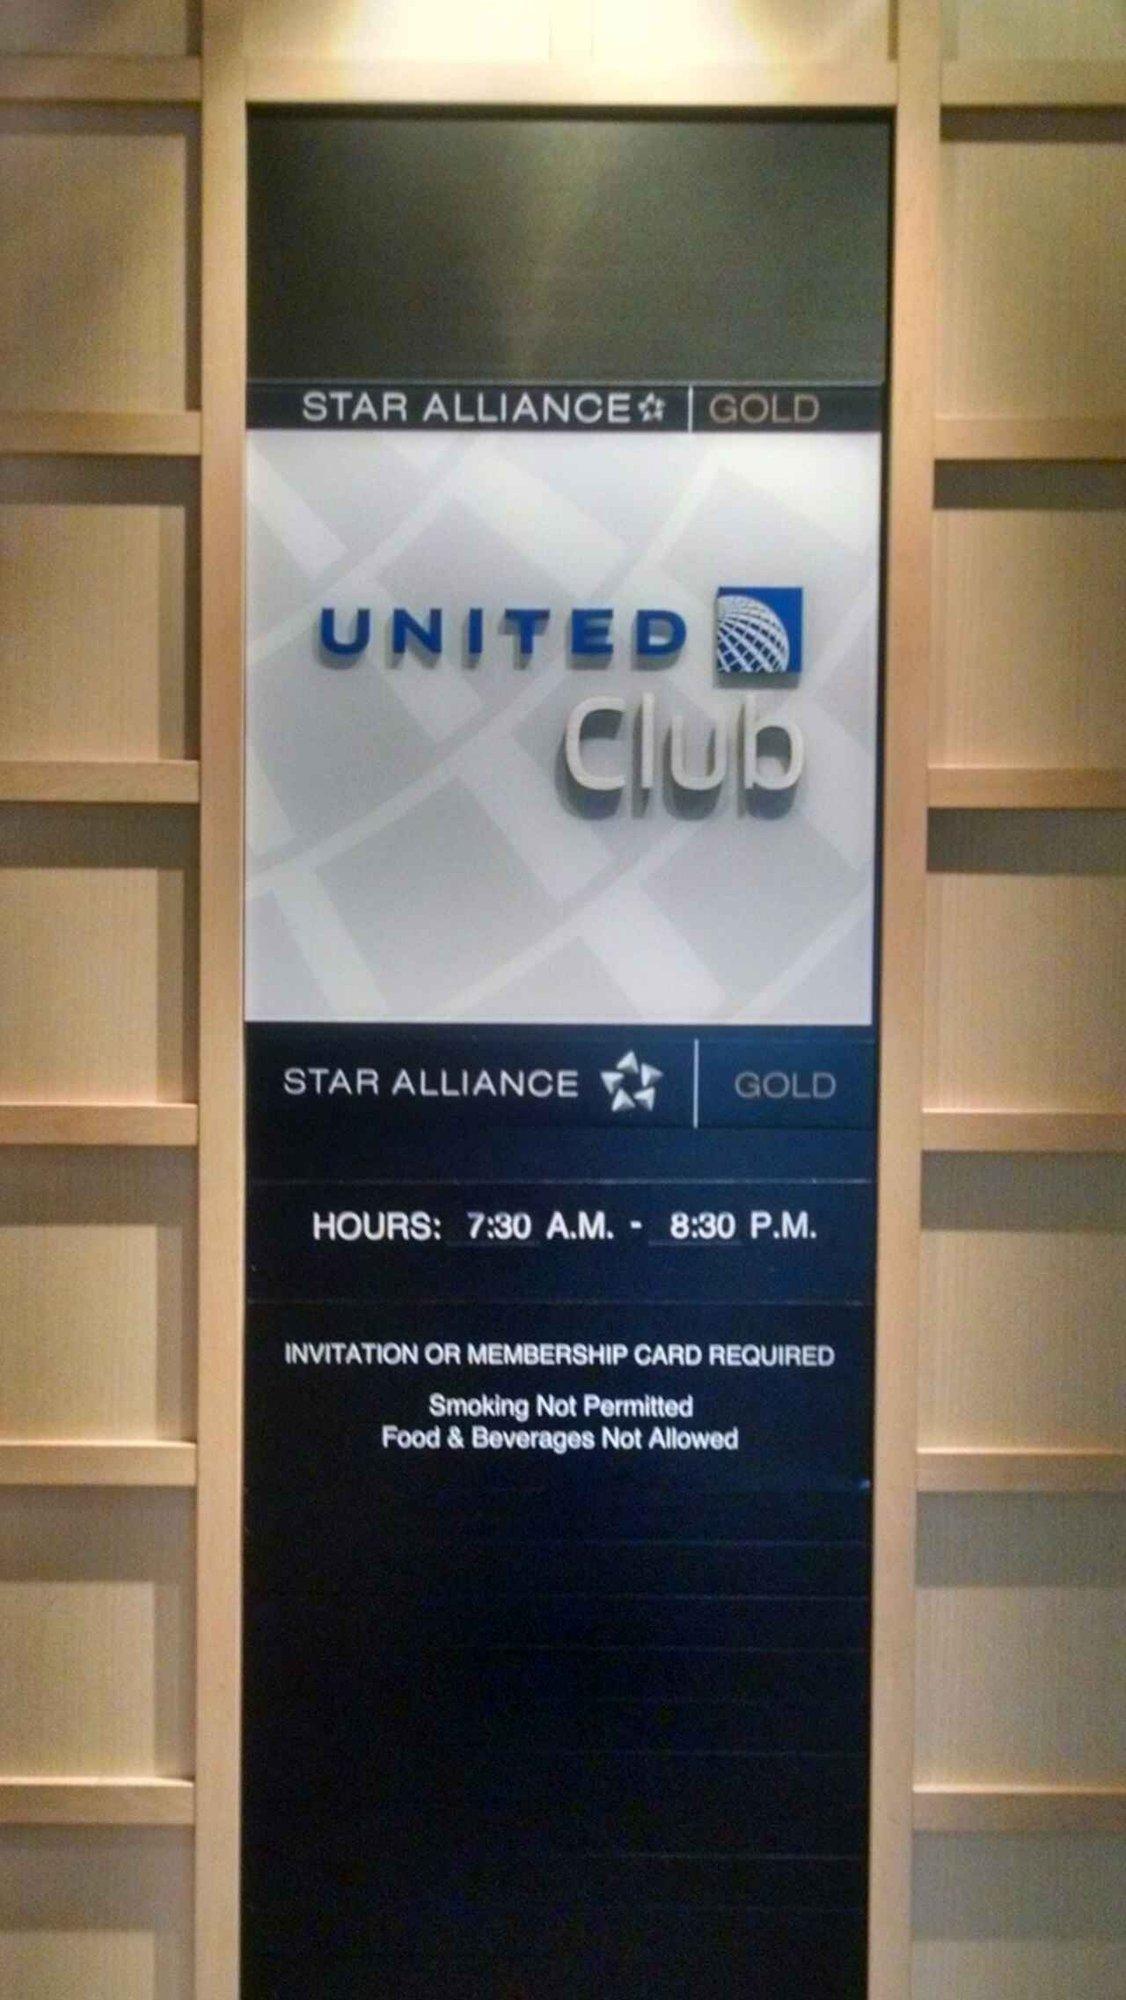 United Airlines United Club image 23 of 52